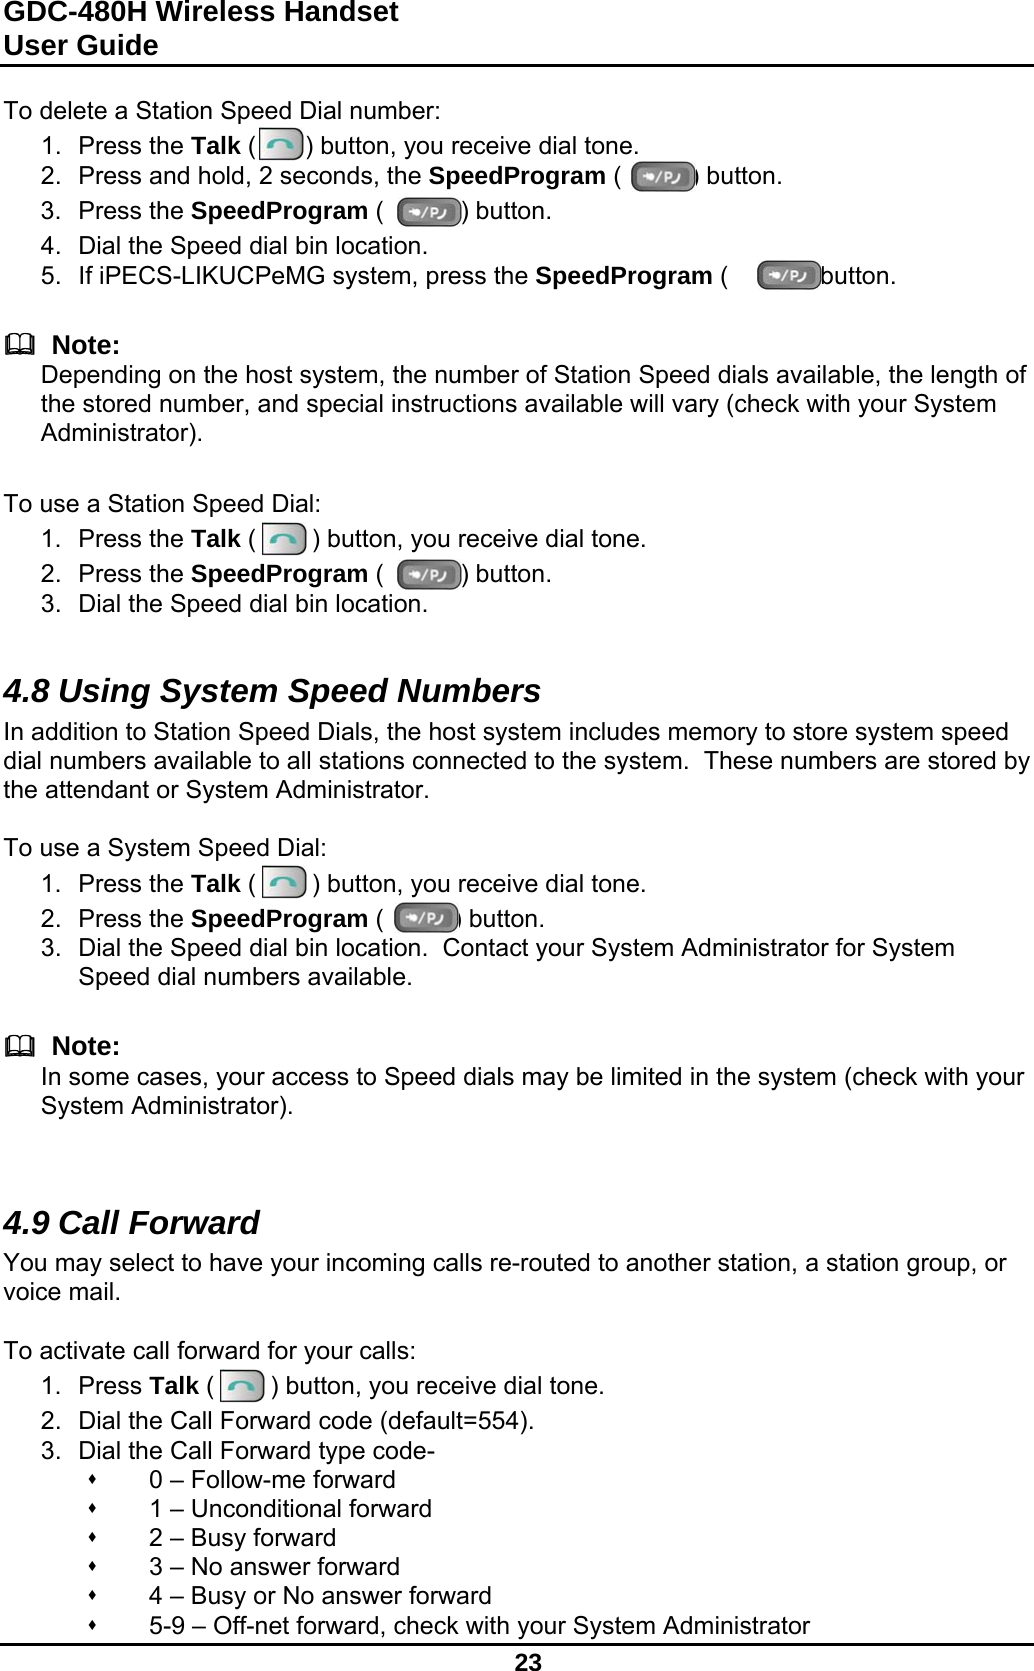 GDC-480H Wireless Handset User Guide   23  To delete a Station Speed Dial number: 1. Press the Talk (       ) button, you receive dial tone. 2.  Press and hold, 2 seconds, the SpeedProgram (          ) button. 3. Press the SpeedProgram (           ) button. 4.  Dial the Speed dial bin location. 5.  If iPECS-LIKUCPeMG system, press the SpeedProgram (           ) button.     Note: Depending on the host system, the number of Station Speed dials available, the length of the stored number, and special instructions available will vary (check with your System Administrator).   To use a Station Speed Dial: 1. Press the Talk (        ) button, you receive dial tone. 2. Press the SpeedProgram (           ) button. 3.  Dial the Speed dial bin location.  4.8 Using System Speed Numbers In addition to Station Speed Dials, the host system includes memory to store system speed dial numbers available to all stations connected to the system.  These numbers are stored by the attendant or System Administrator.  To use a System Speed Dial: 1. Press the Talk (        ) button, you receive dial tone. 2. Press the SpeedProgram (          ) button. 3.  Dial the Speed dial bin location.  Contact your System Administrator for System Speed dial numbers available.     Note: In some cases, your access to Speed dials may be limited in the system (check with your System Administrator).   4.9 Call Forward You may select to have your incoming calls re-routed to another station, a station group, or voice mail.  To activate call forward for your calls: 1. Press Talk (        ) button, you receive dial tone. 2.  Dial the Call Forward code (default=554). 3.  Dial the Call Forward type code-   0 – Follow-me forward   1 – Unconditional forward   2 – Busy forward   3 – No answer forward   4 – Busy or No answer forward   5-9 – Off-net forward, check with your System Administrator 